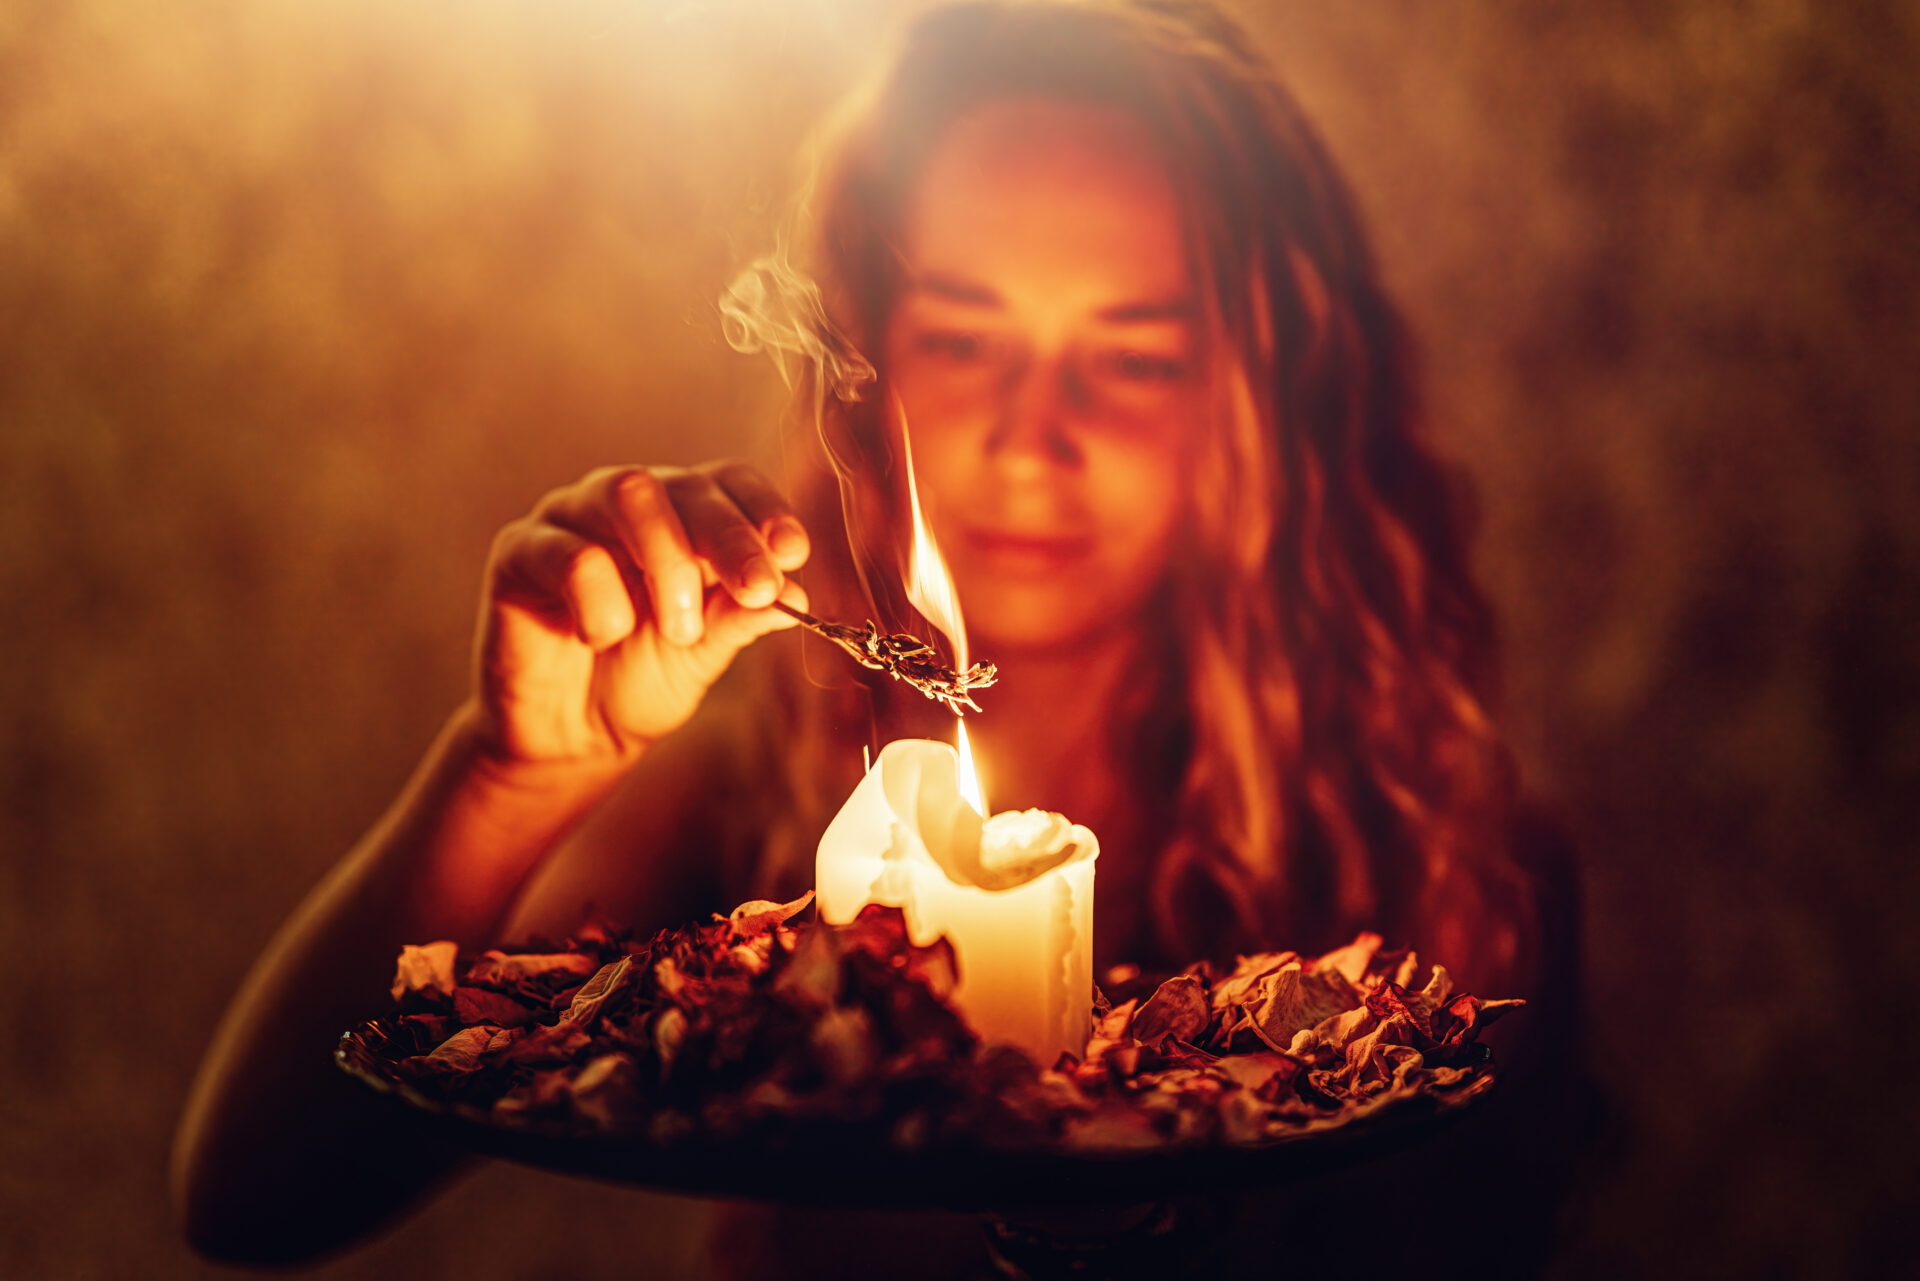 Woman lights a dry plant on a candle.